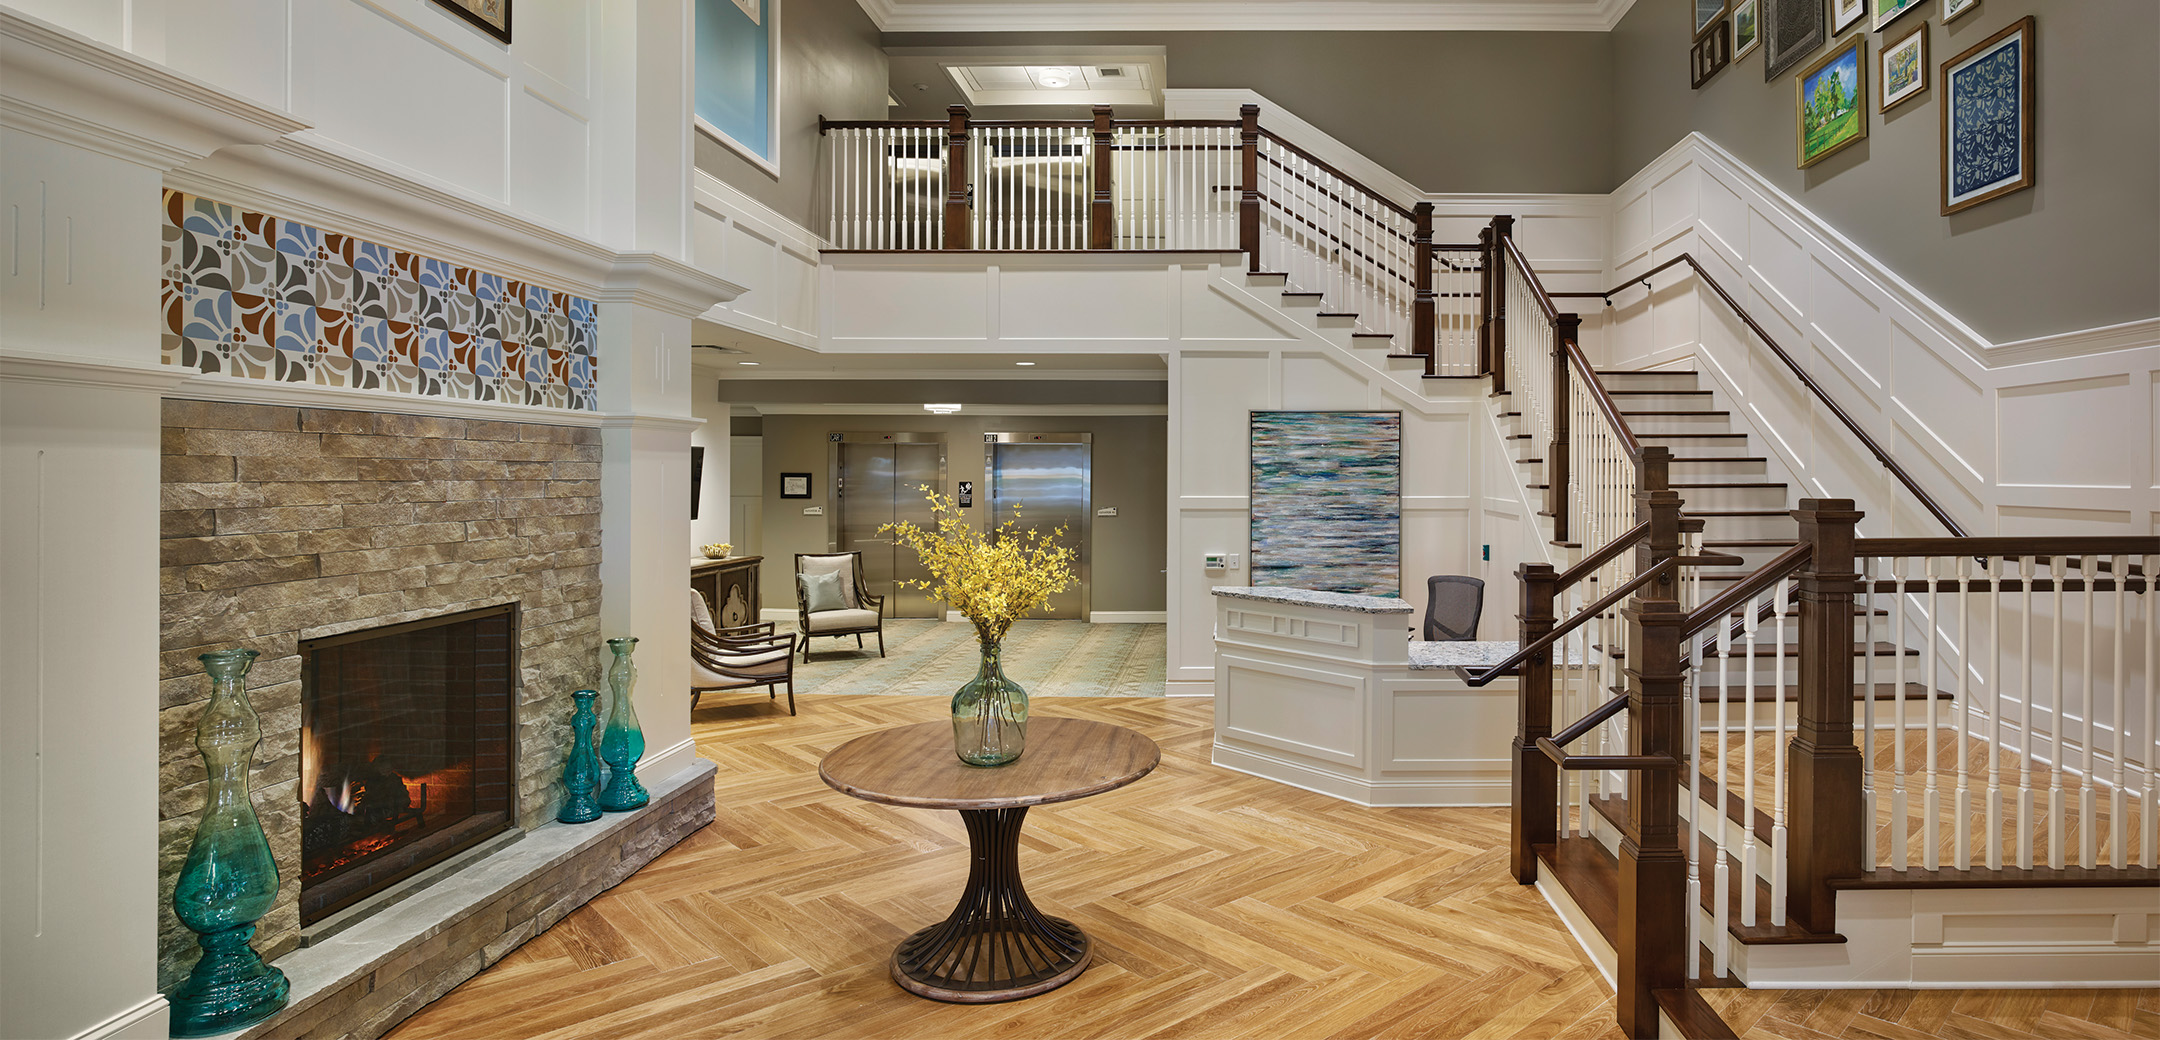 An interior view of the Arbor Terrace Morris Plains staircase leading up to the second floor with white accent panels and grey walls that have framed paintings on them and a brick fireplace on the right wall.